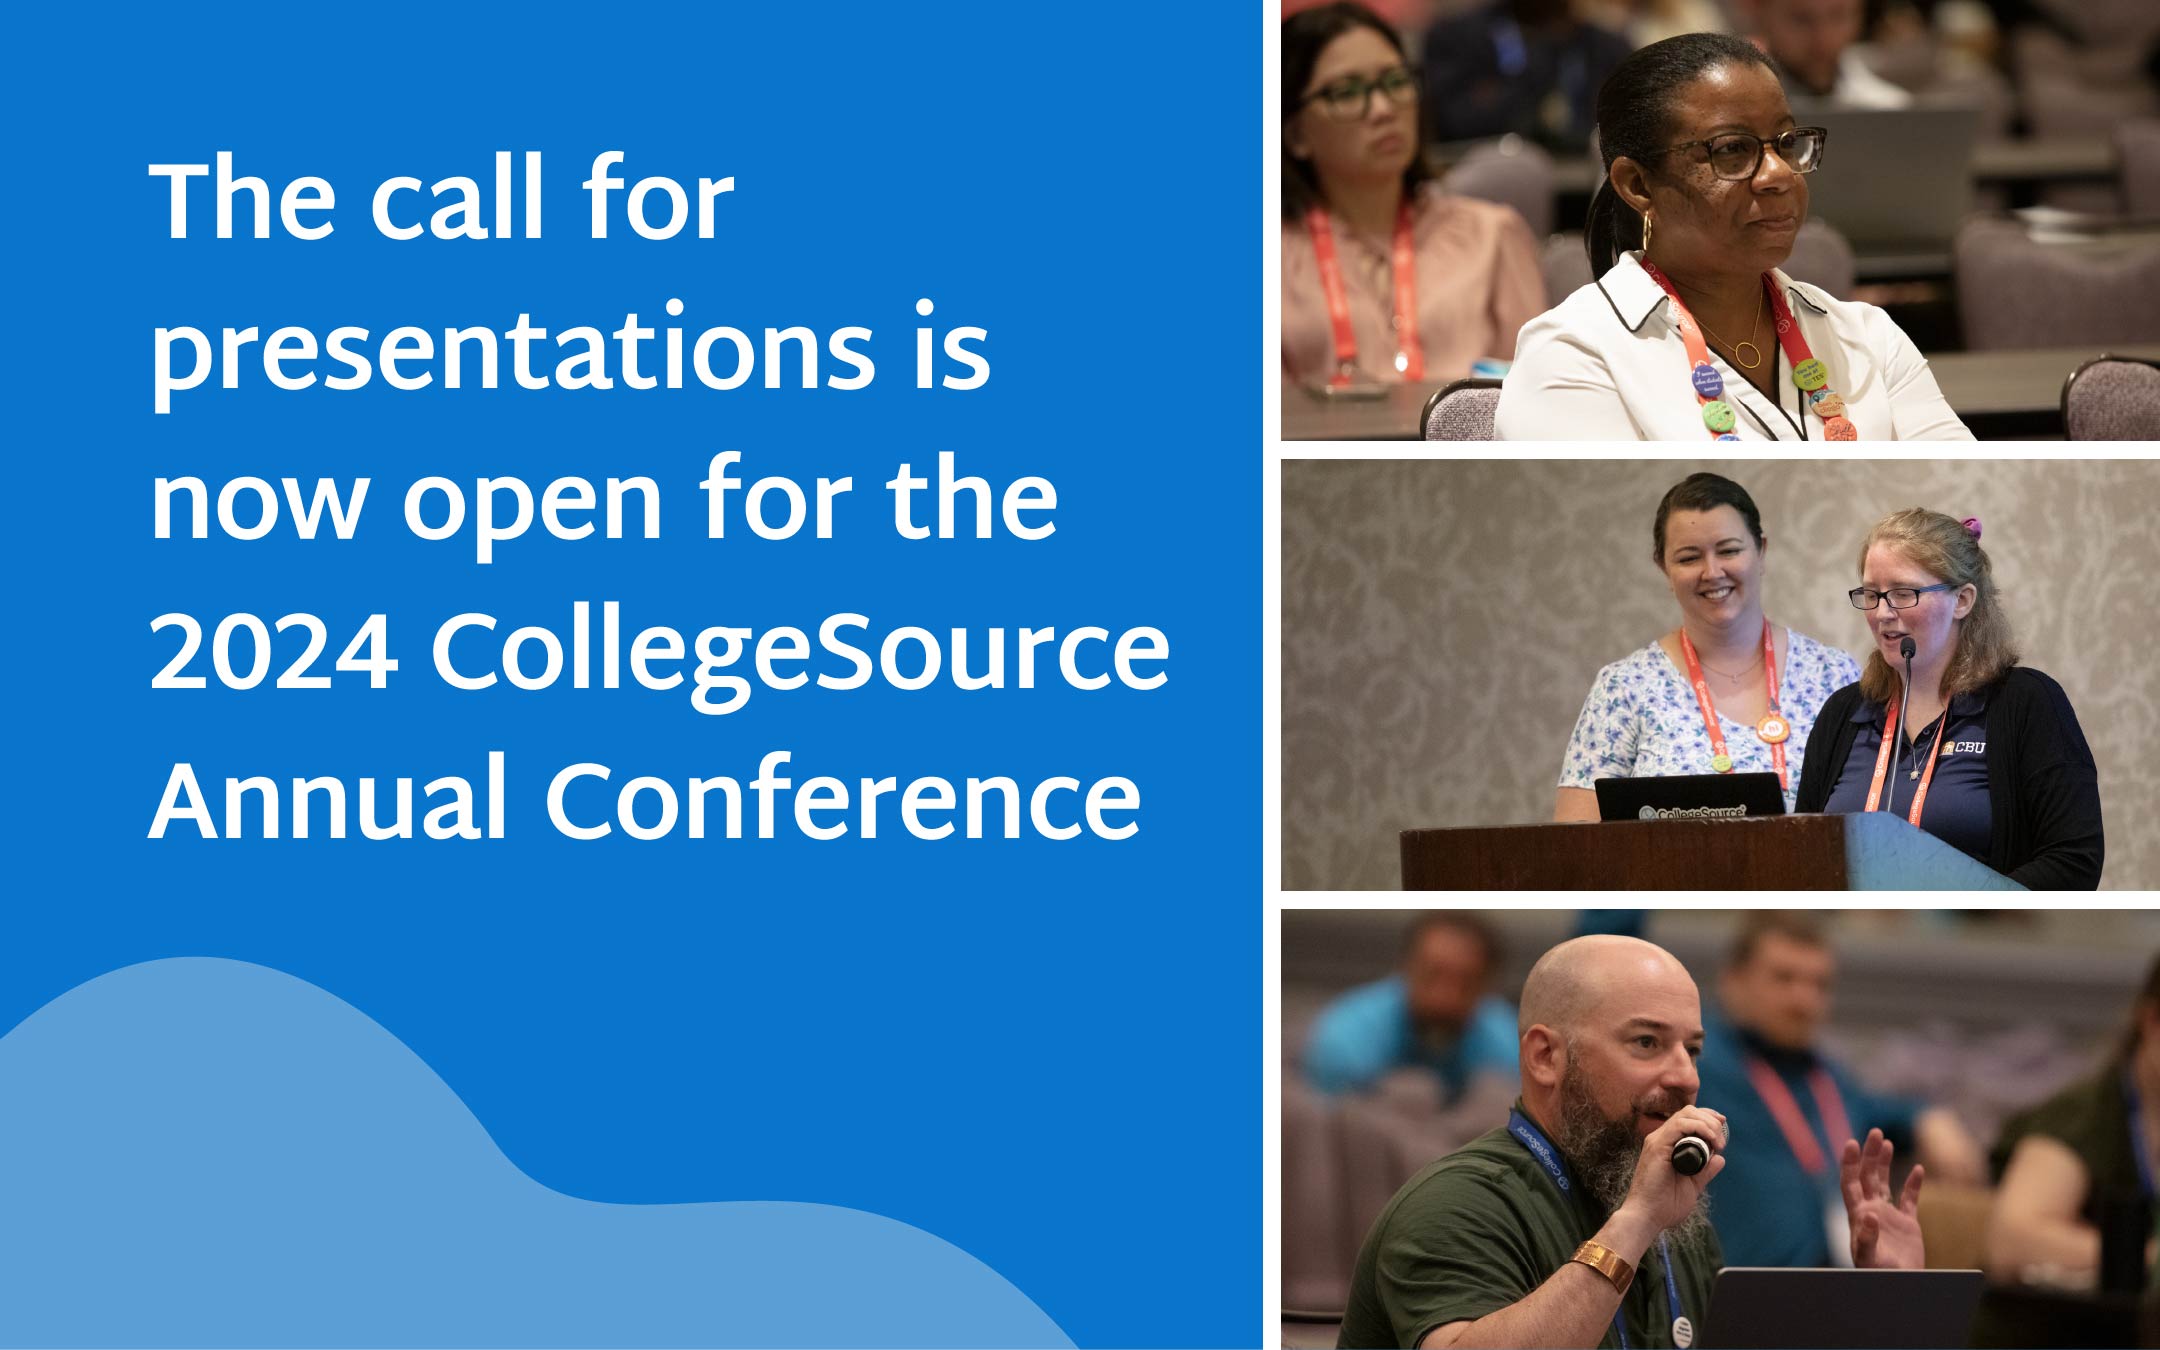 Call-for-presentation-proposals-2024-collegesource-conference